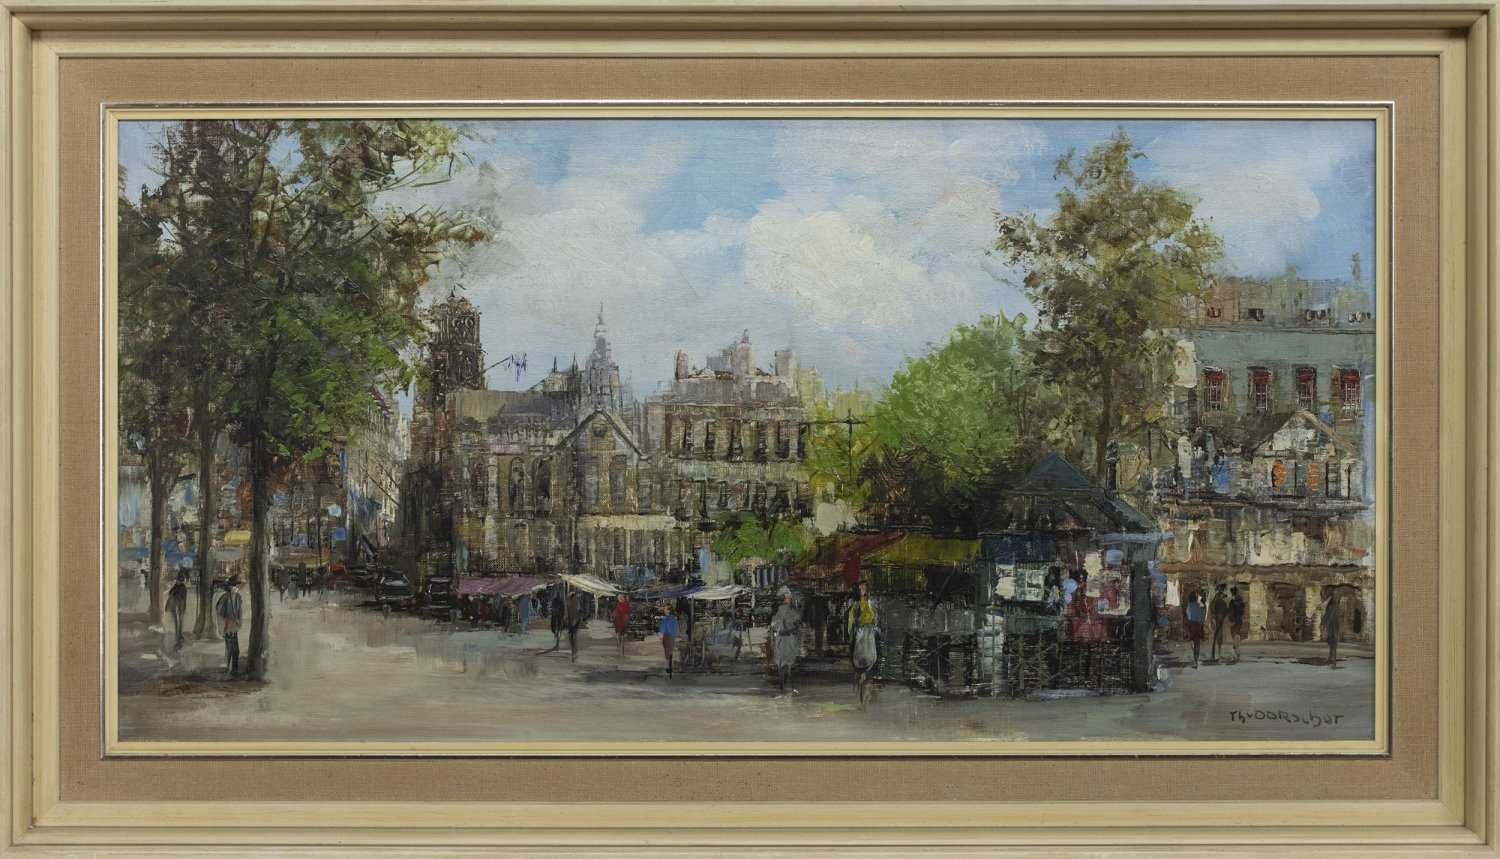 CATHEDRAL SQUARE, AN OIL BY THEO VAN OORSHOT